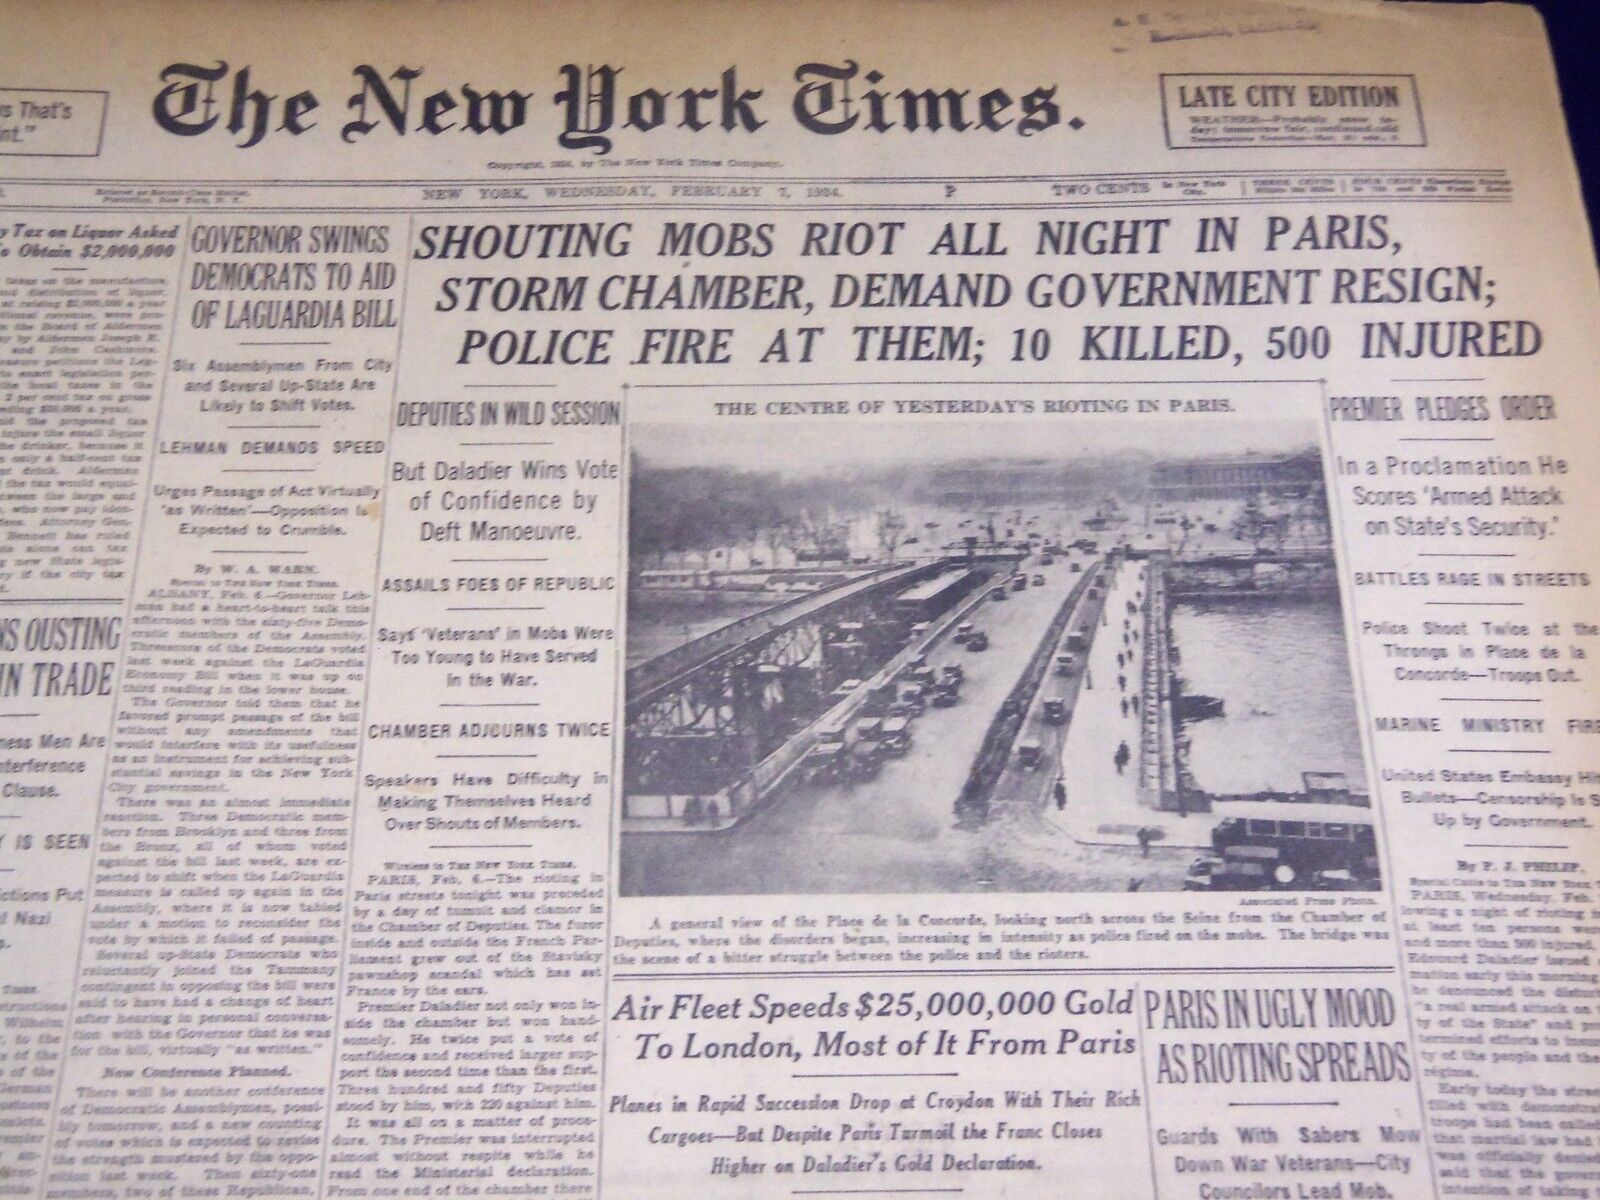 1934 FEBRUARY 7 NEW YORK TIMES - SHOUTING MOBS RIOT ALL NIGHT IN PARIS - NT 1677